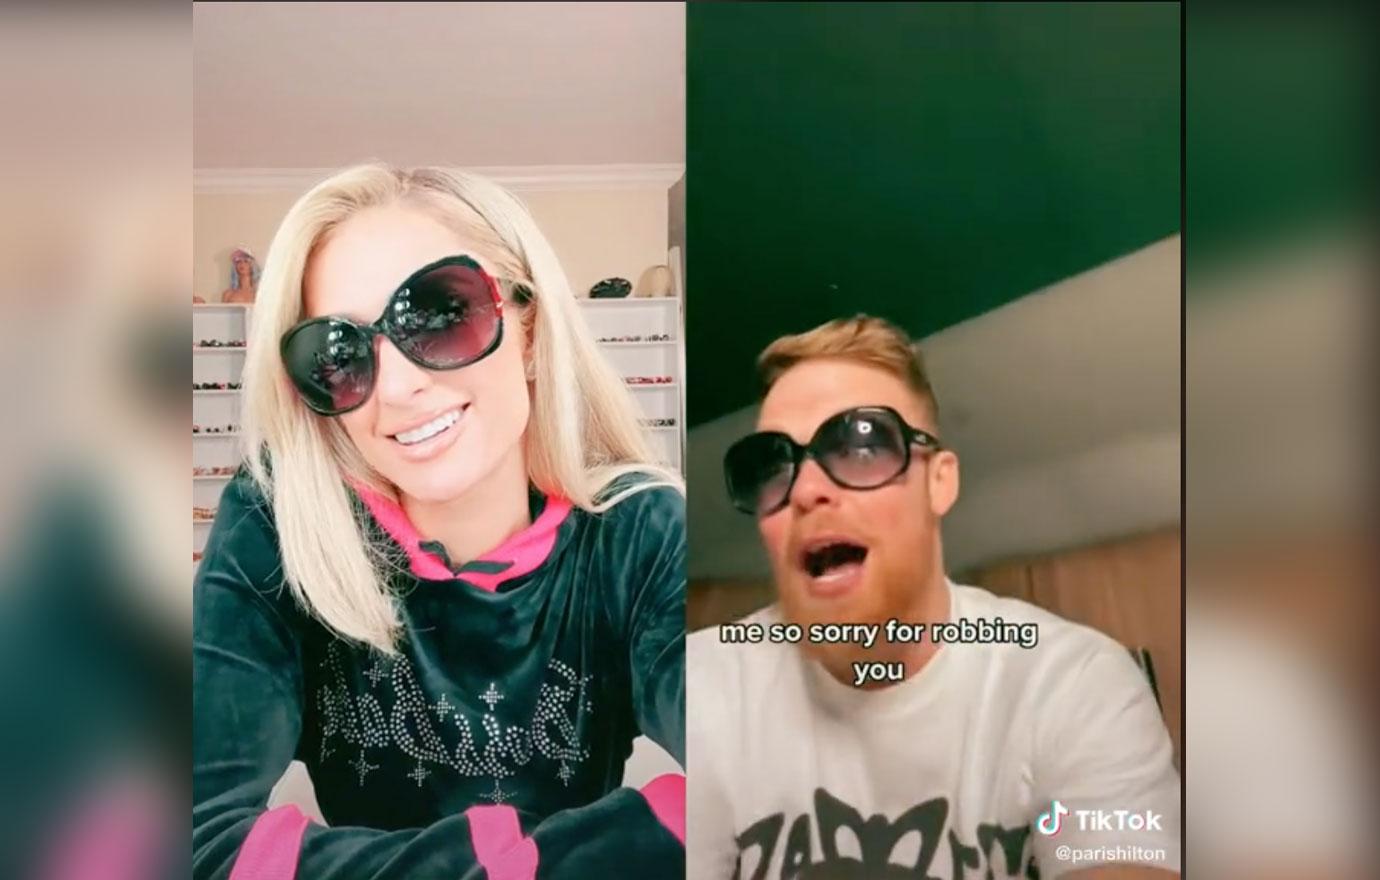 Paris Hilton Duets Tiktok User Who Stole From Her